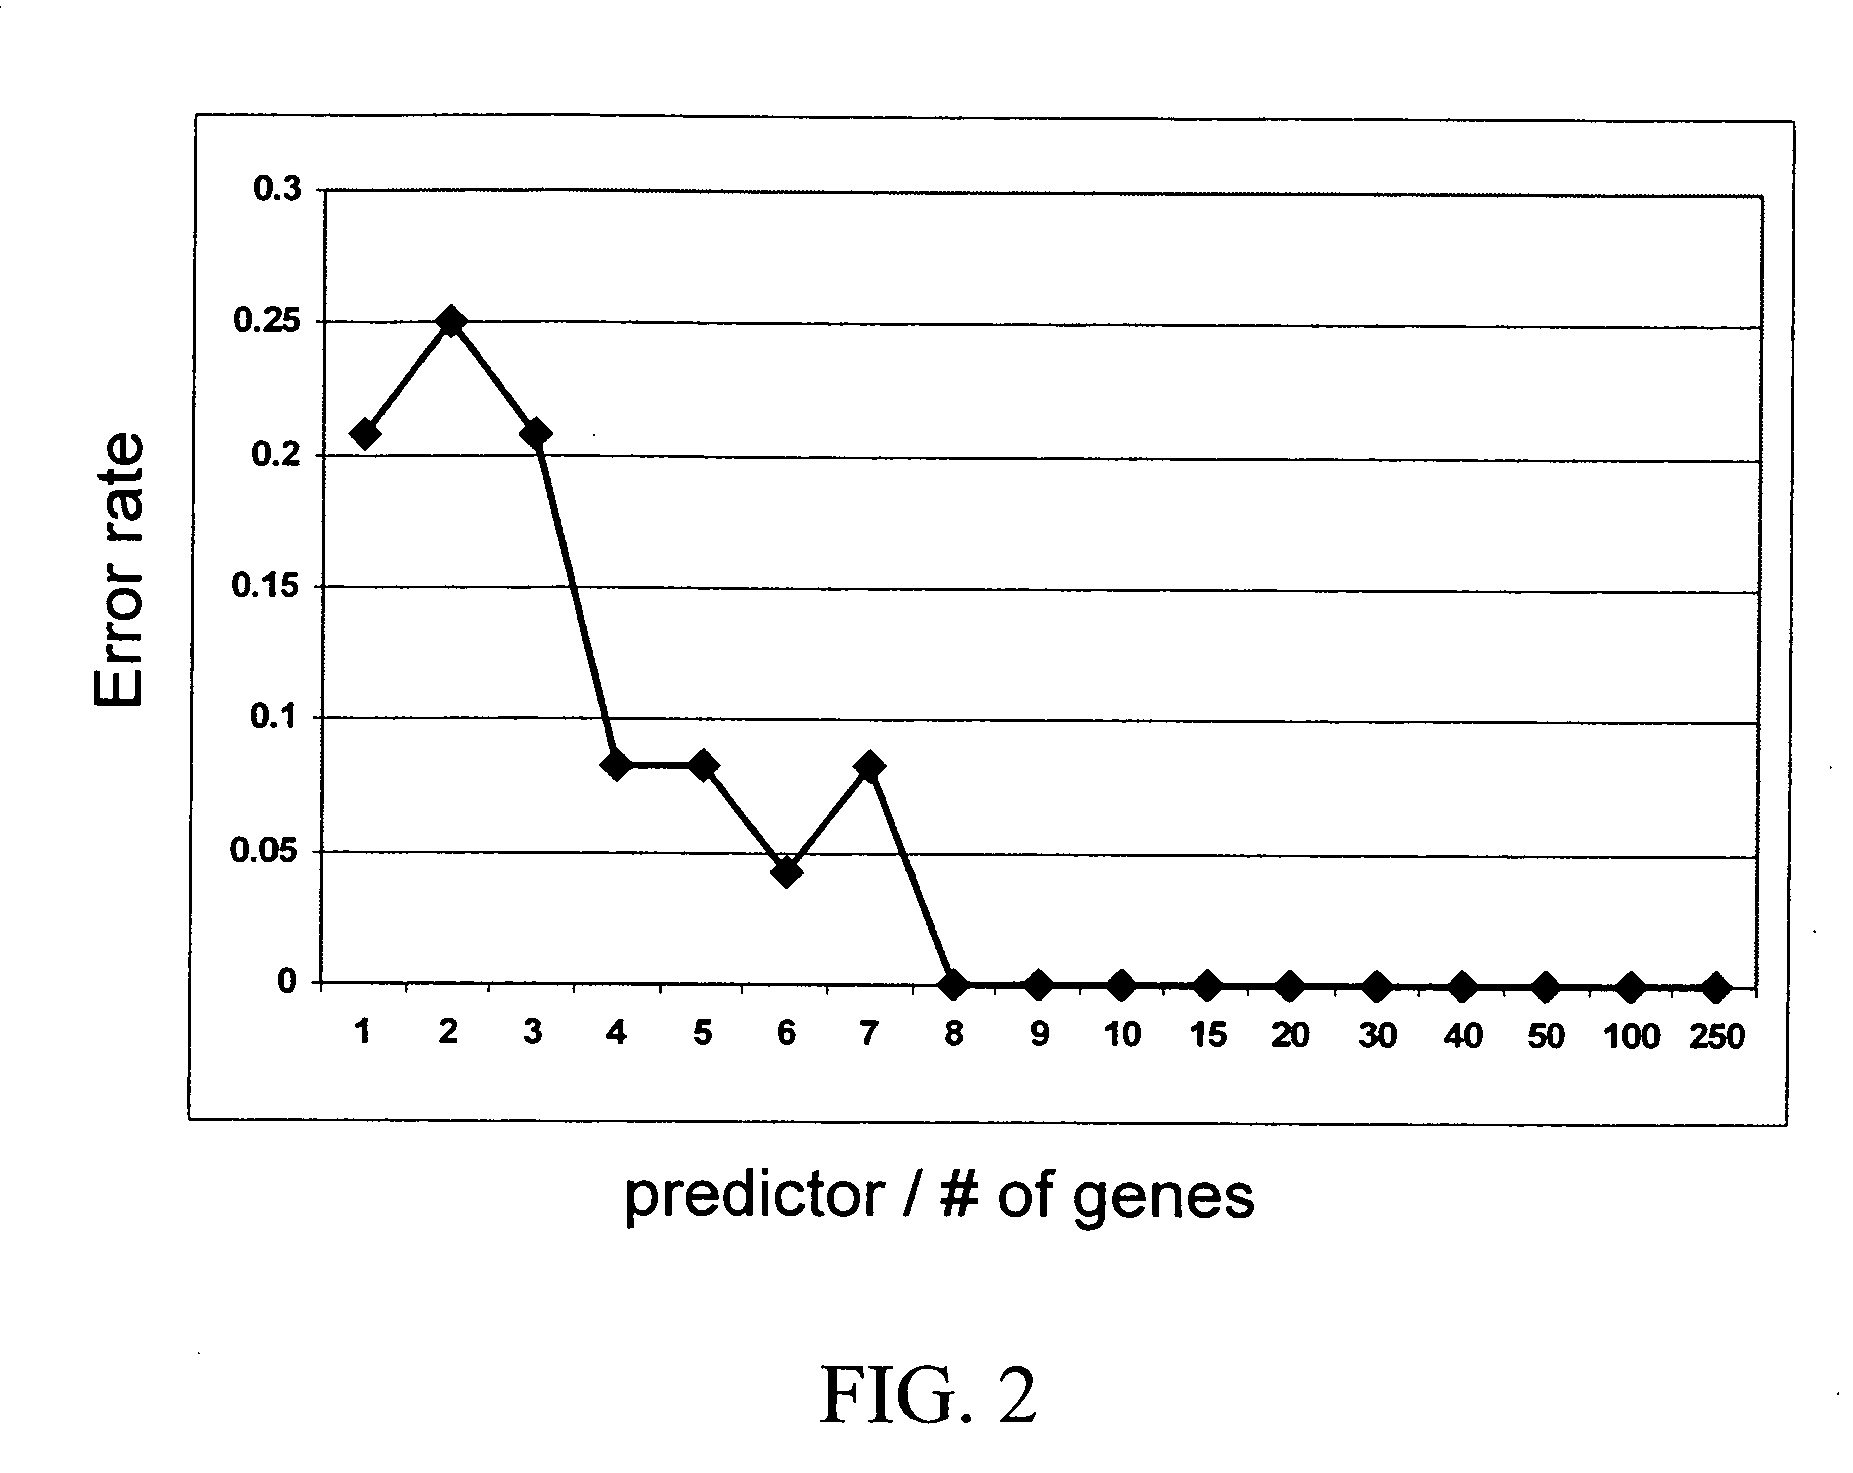 Biomarkers and methods for determining sensitivity to microtubule-stabilizing agents